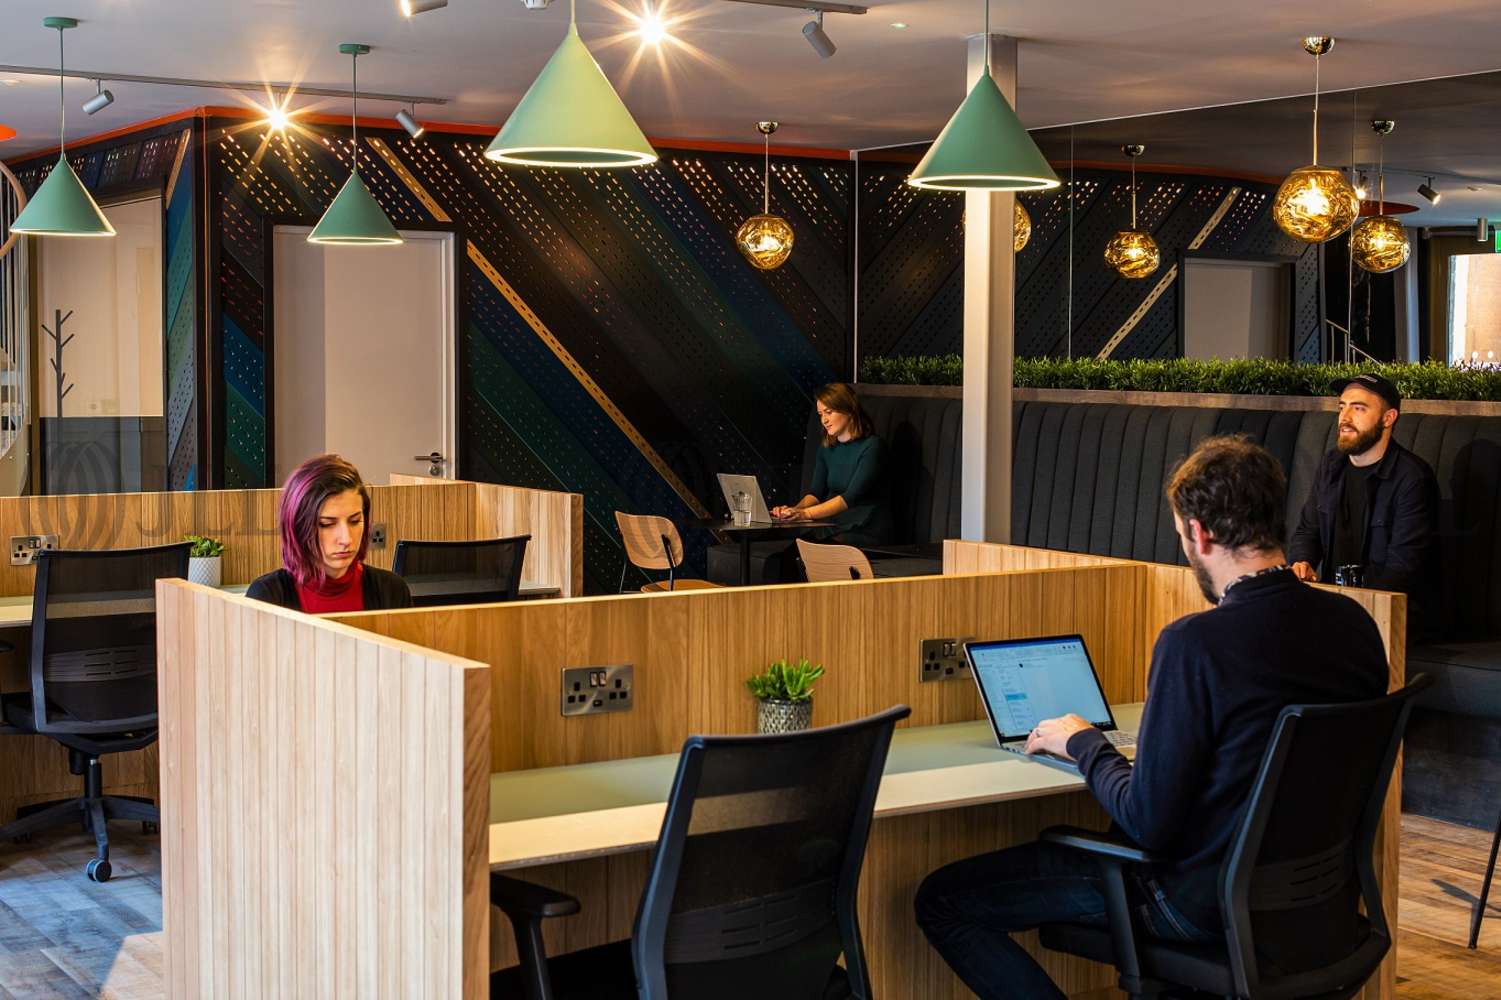 Coworking space Manchester, M4 5BG - The Astley